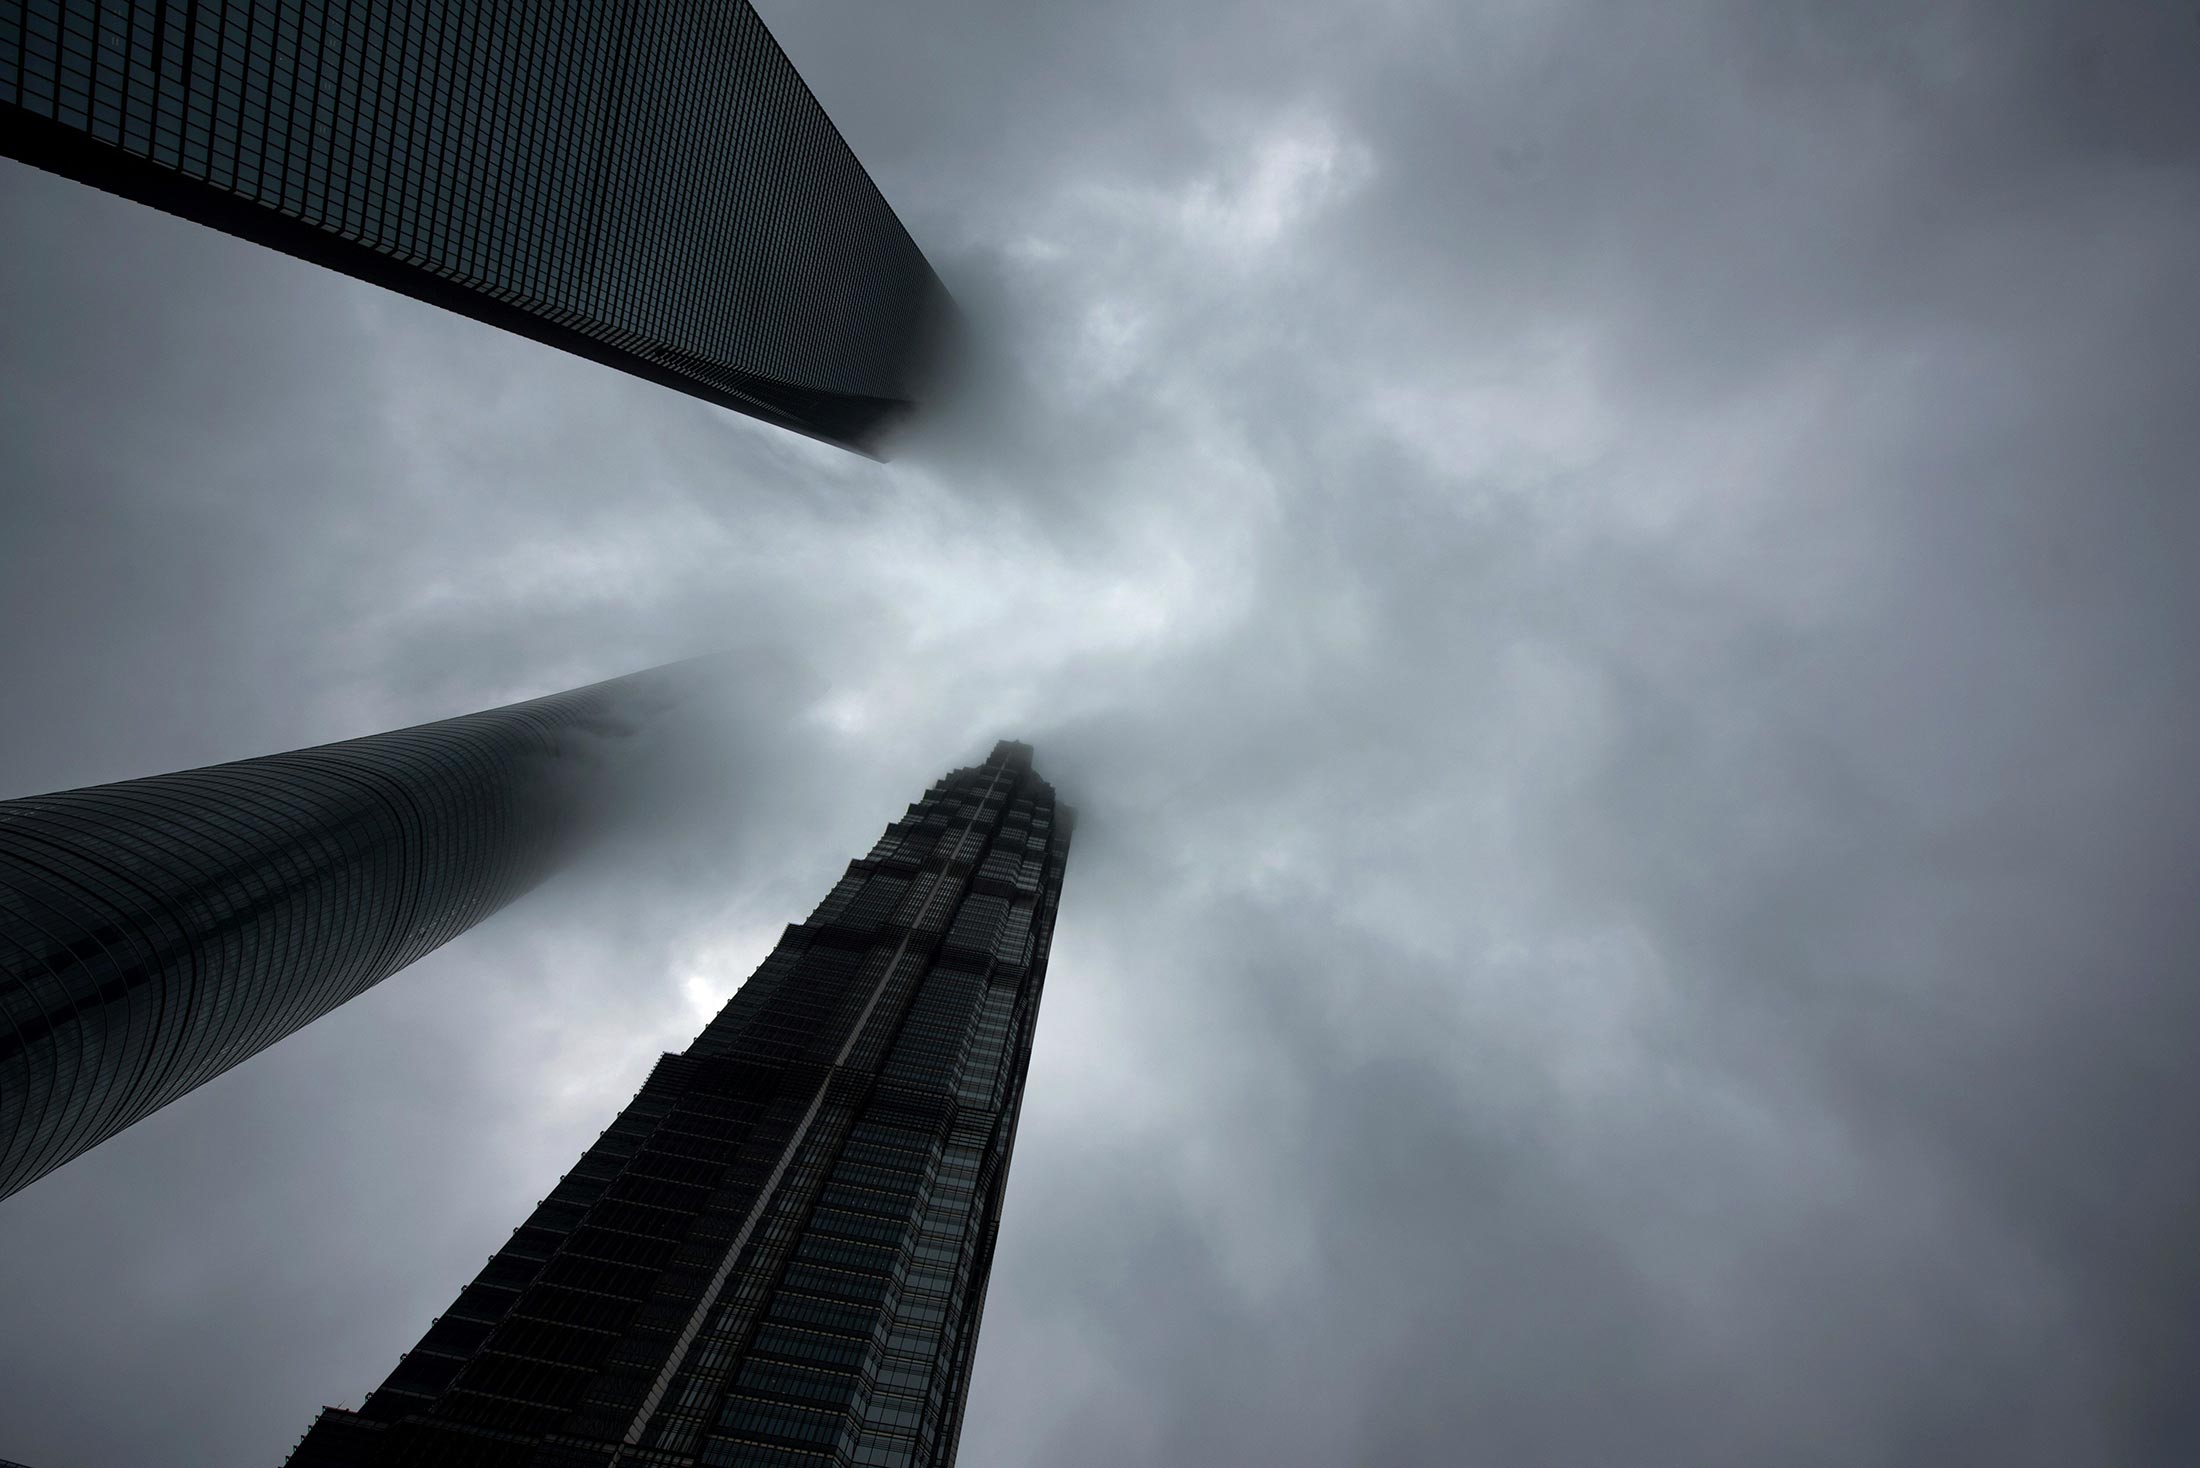 Clouds are seen around the Shanghai World Financial Center in Shanghai on April 6, 2016.
